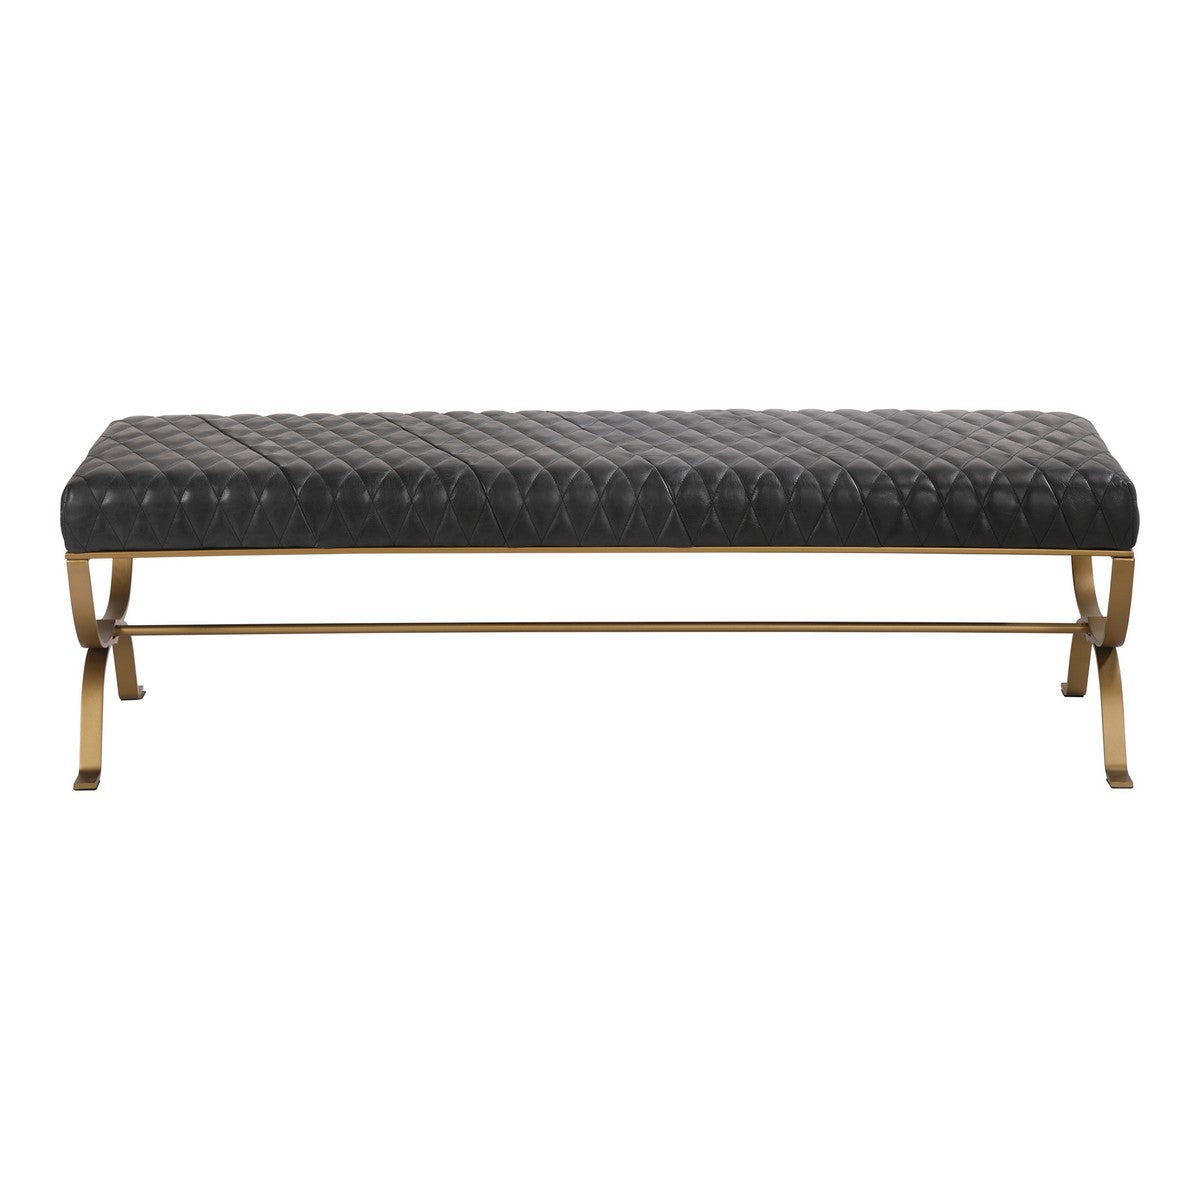 Moe's Home Collection Teatro Bench Antique Black - PK-1109-02 - Moe's Home Collection - Benches - Minimal And Modern - 1